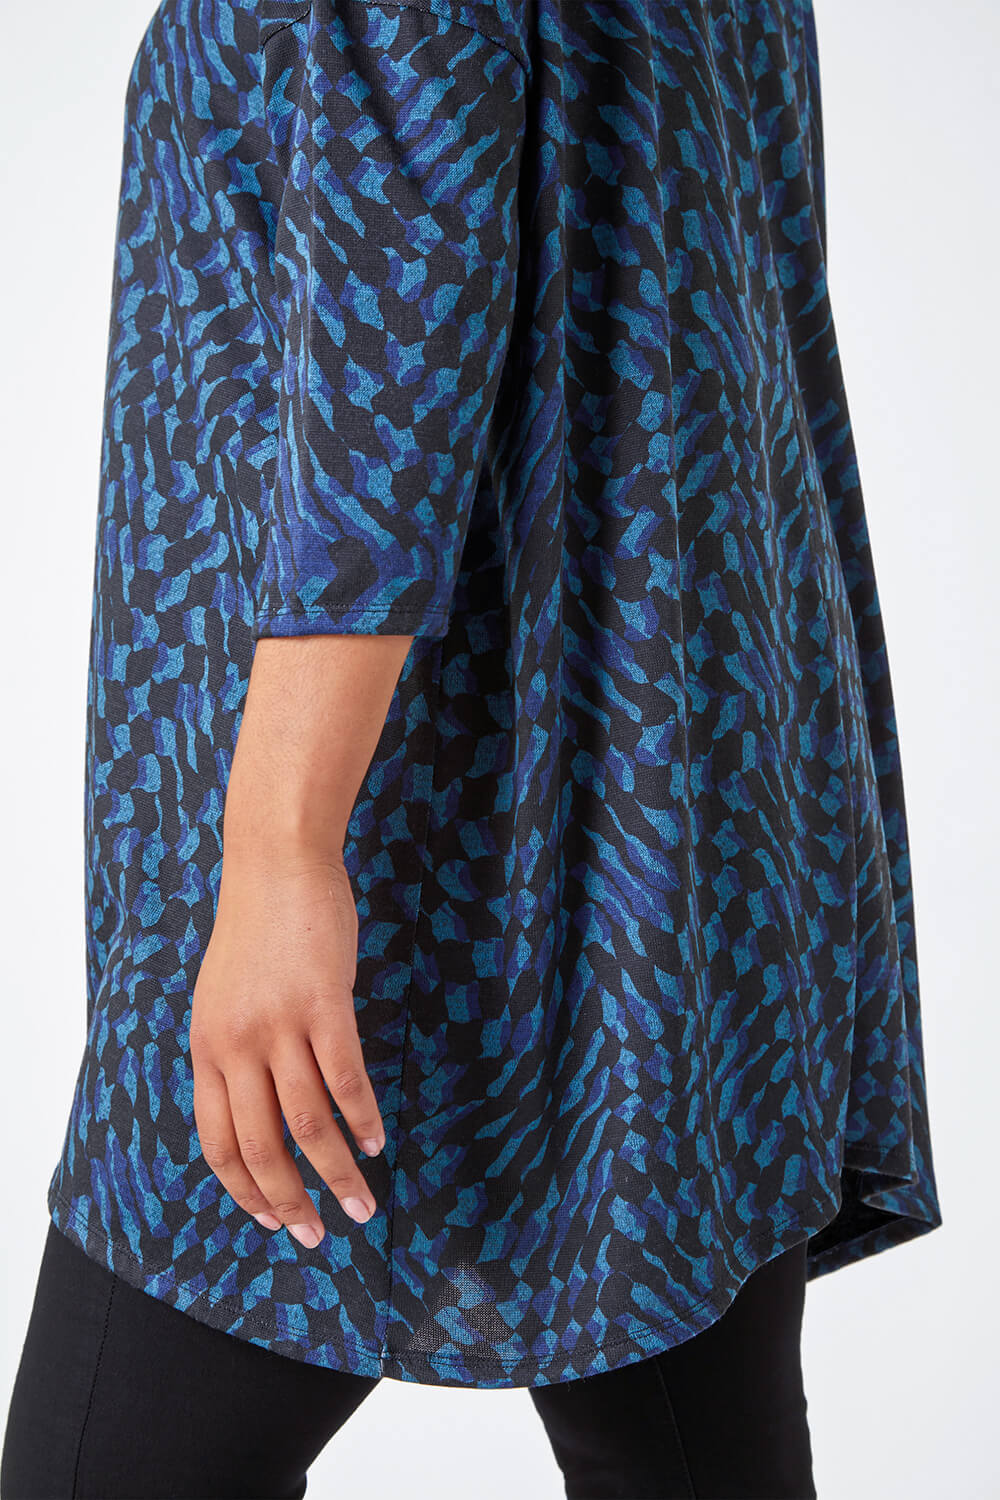 Blue Curve Abstract Print Stretch Tunic Top , Image 5 of 5